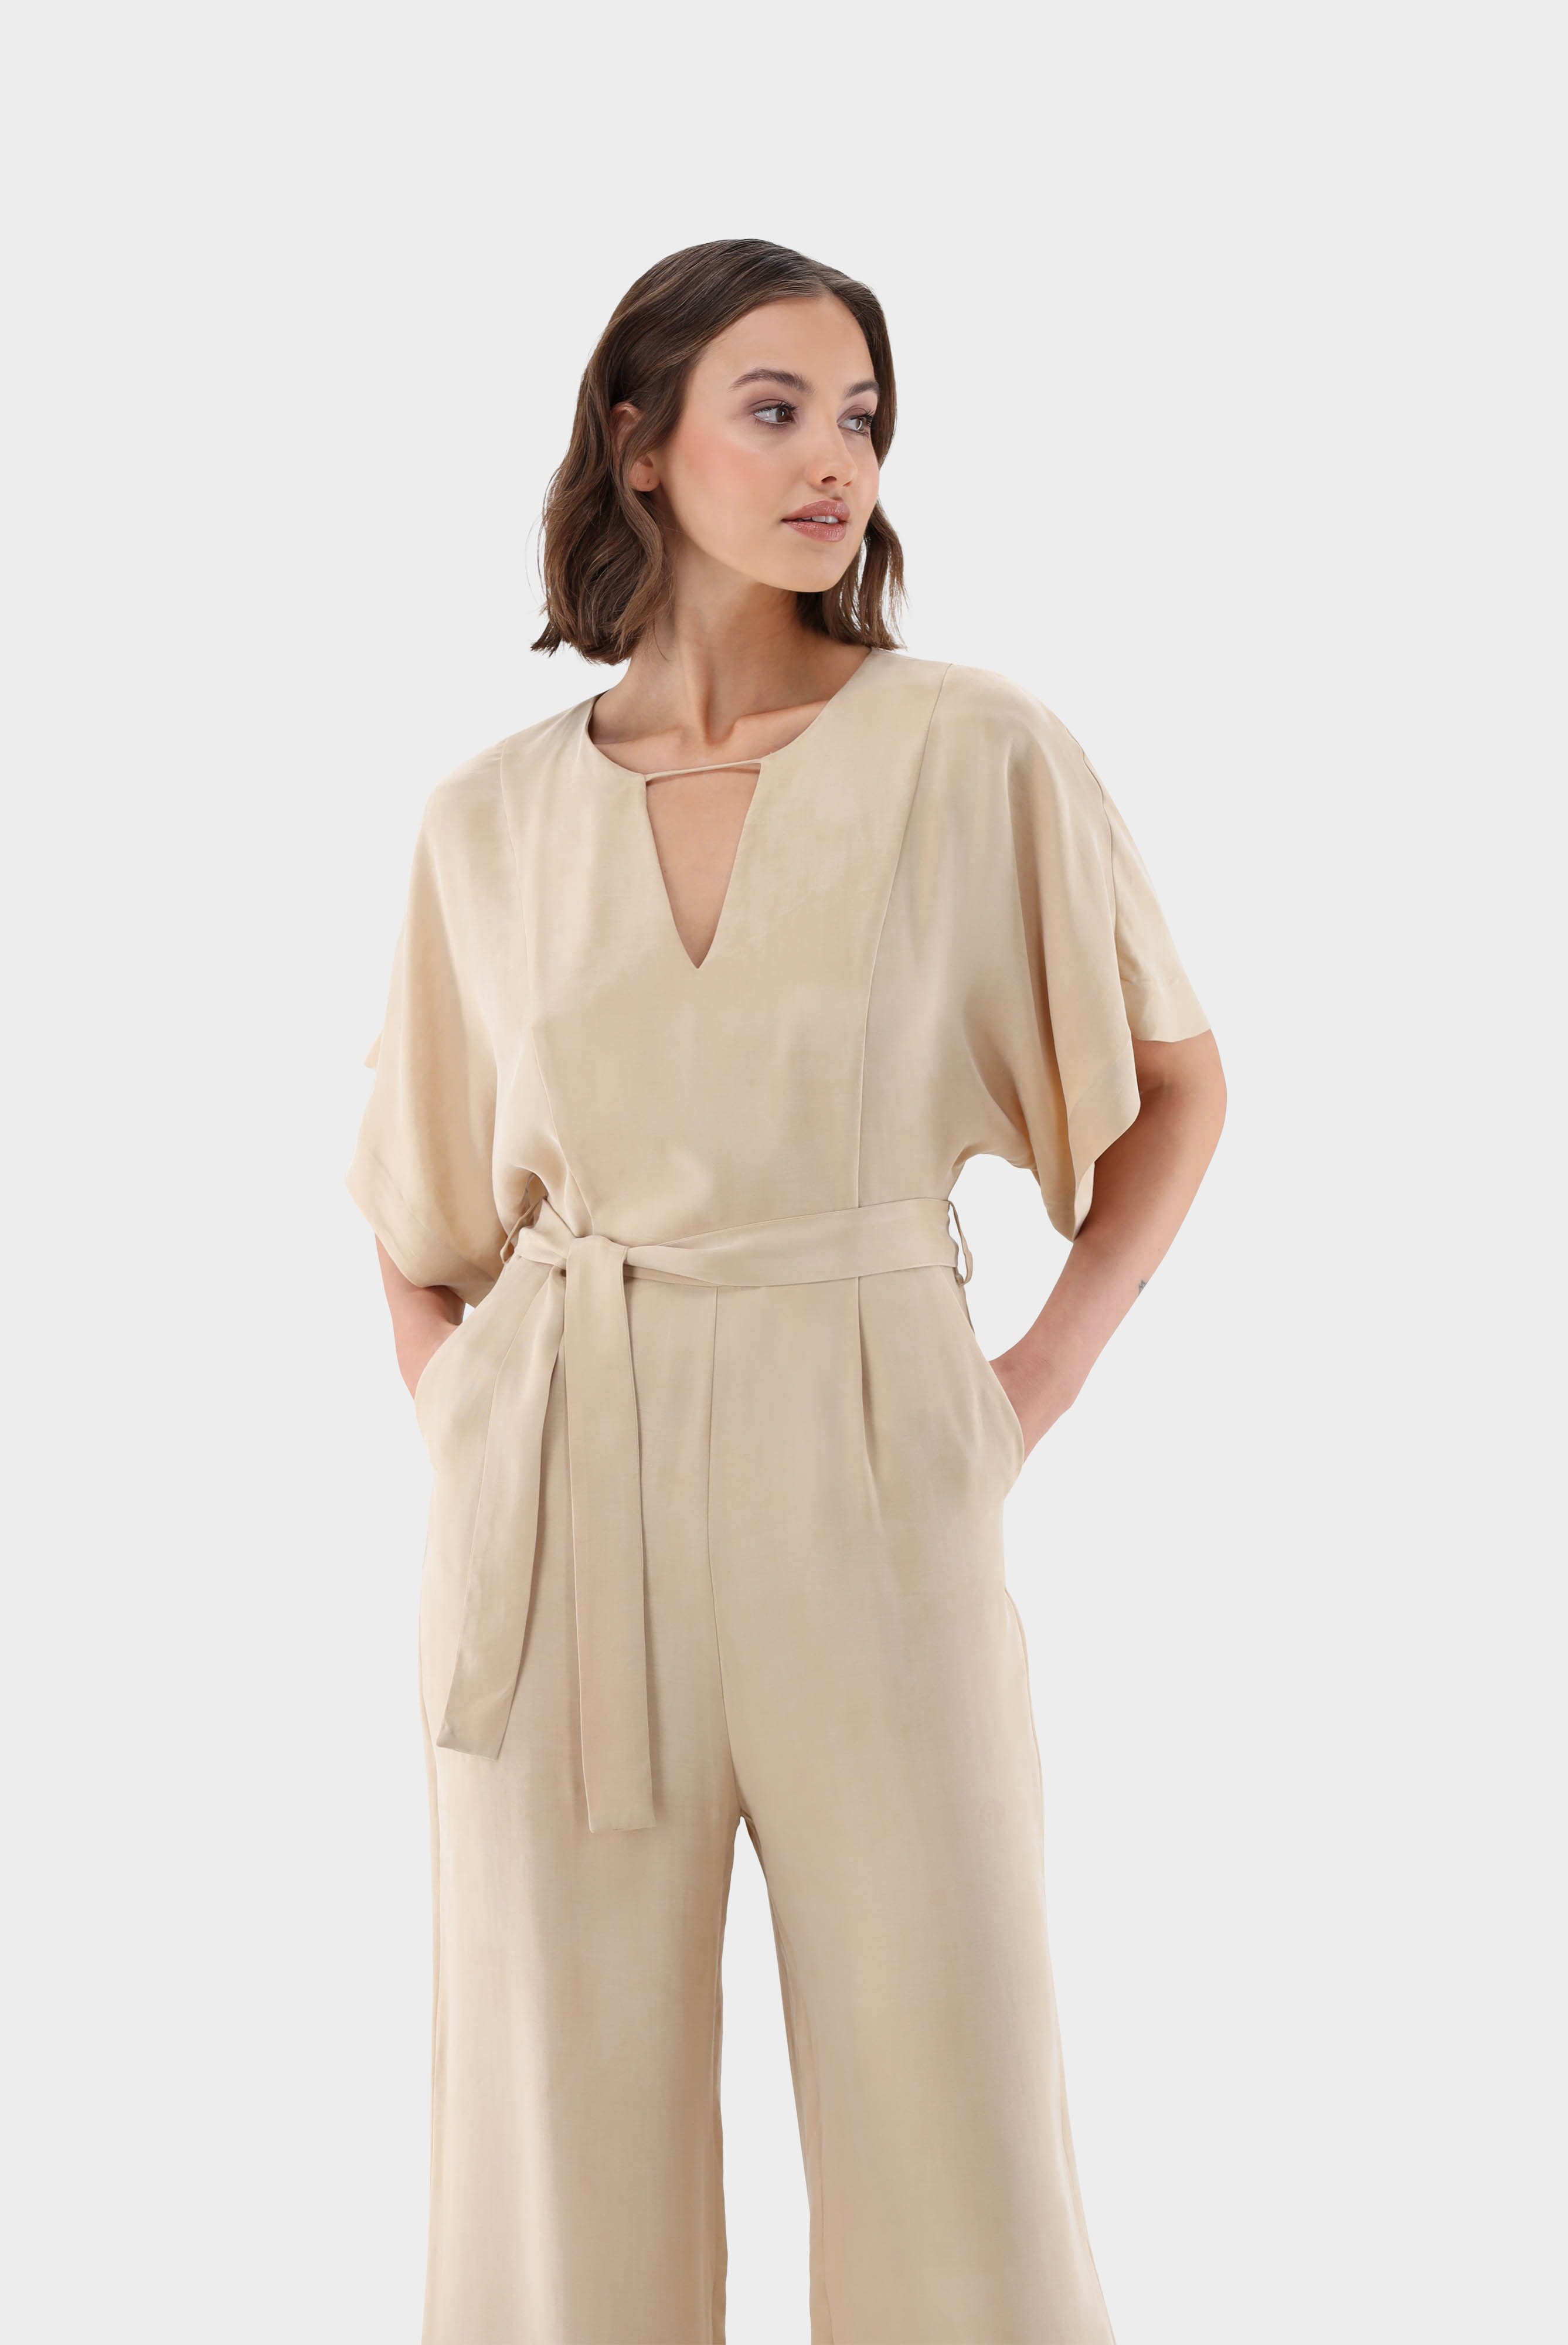 Jeans & Trousers+Jumpsuit with wide Sleeves+05.658Q.22.155007.250.32